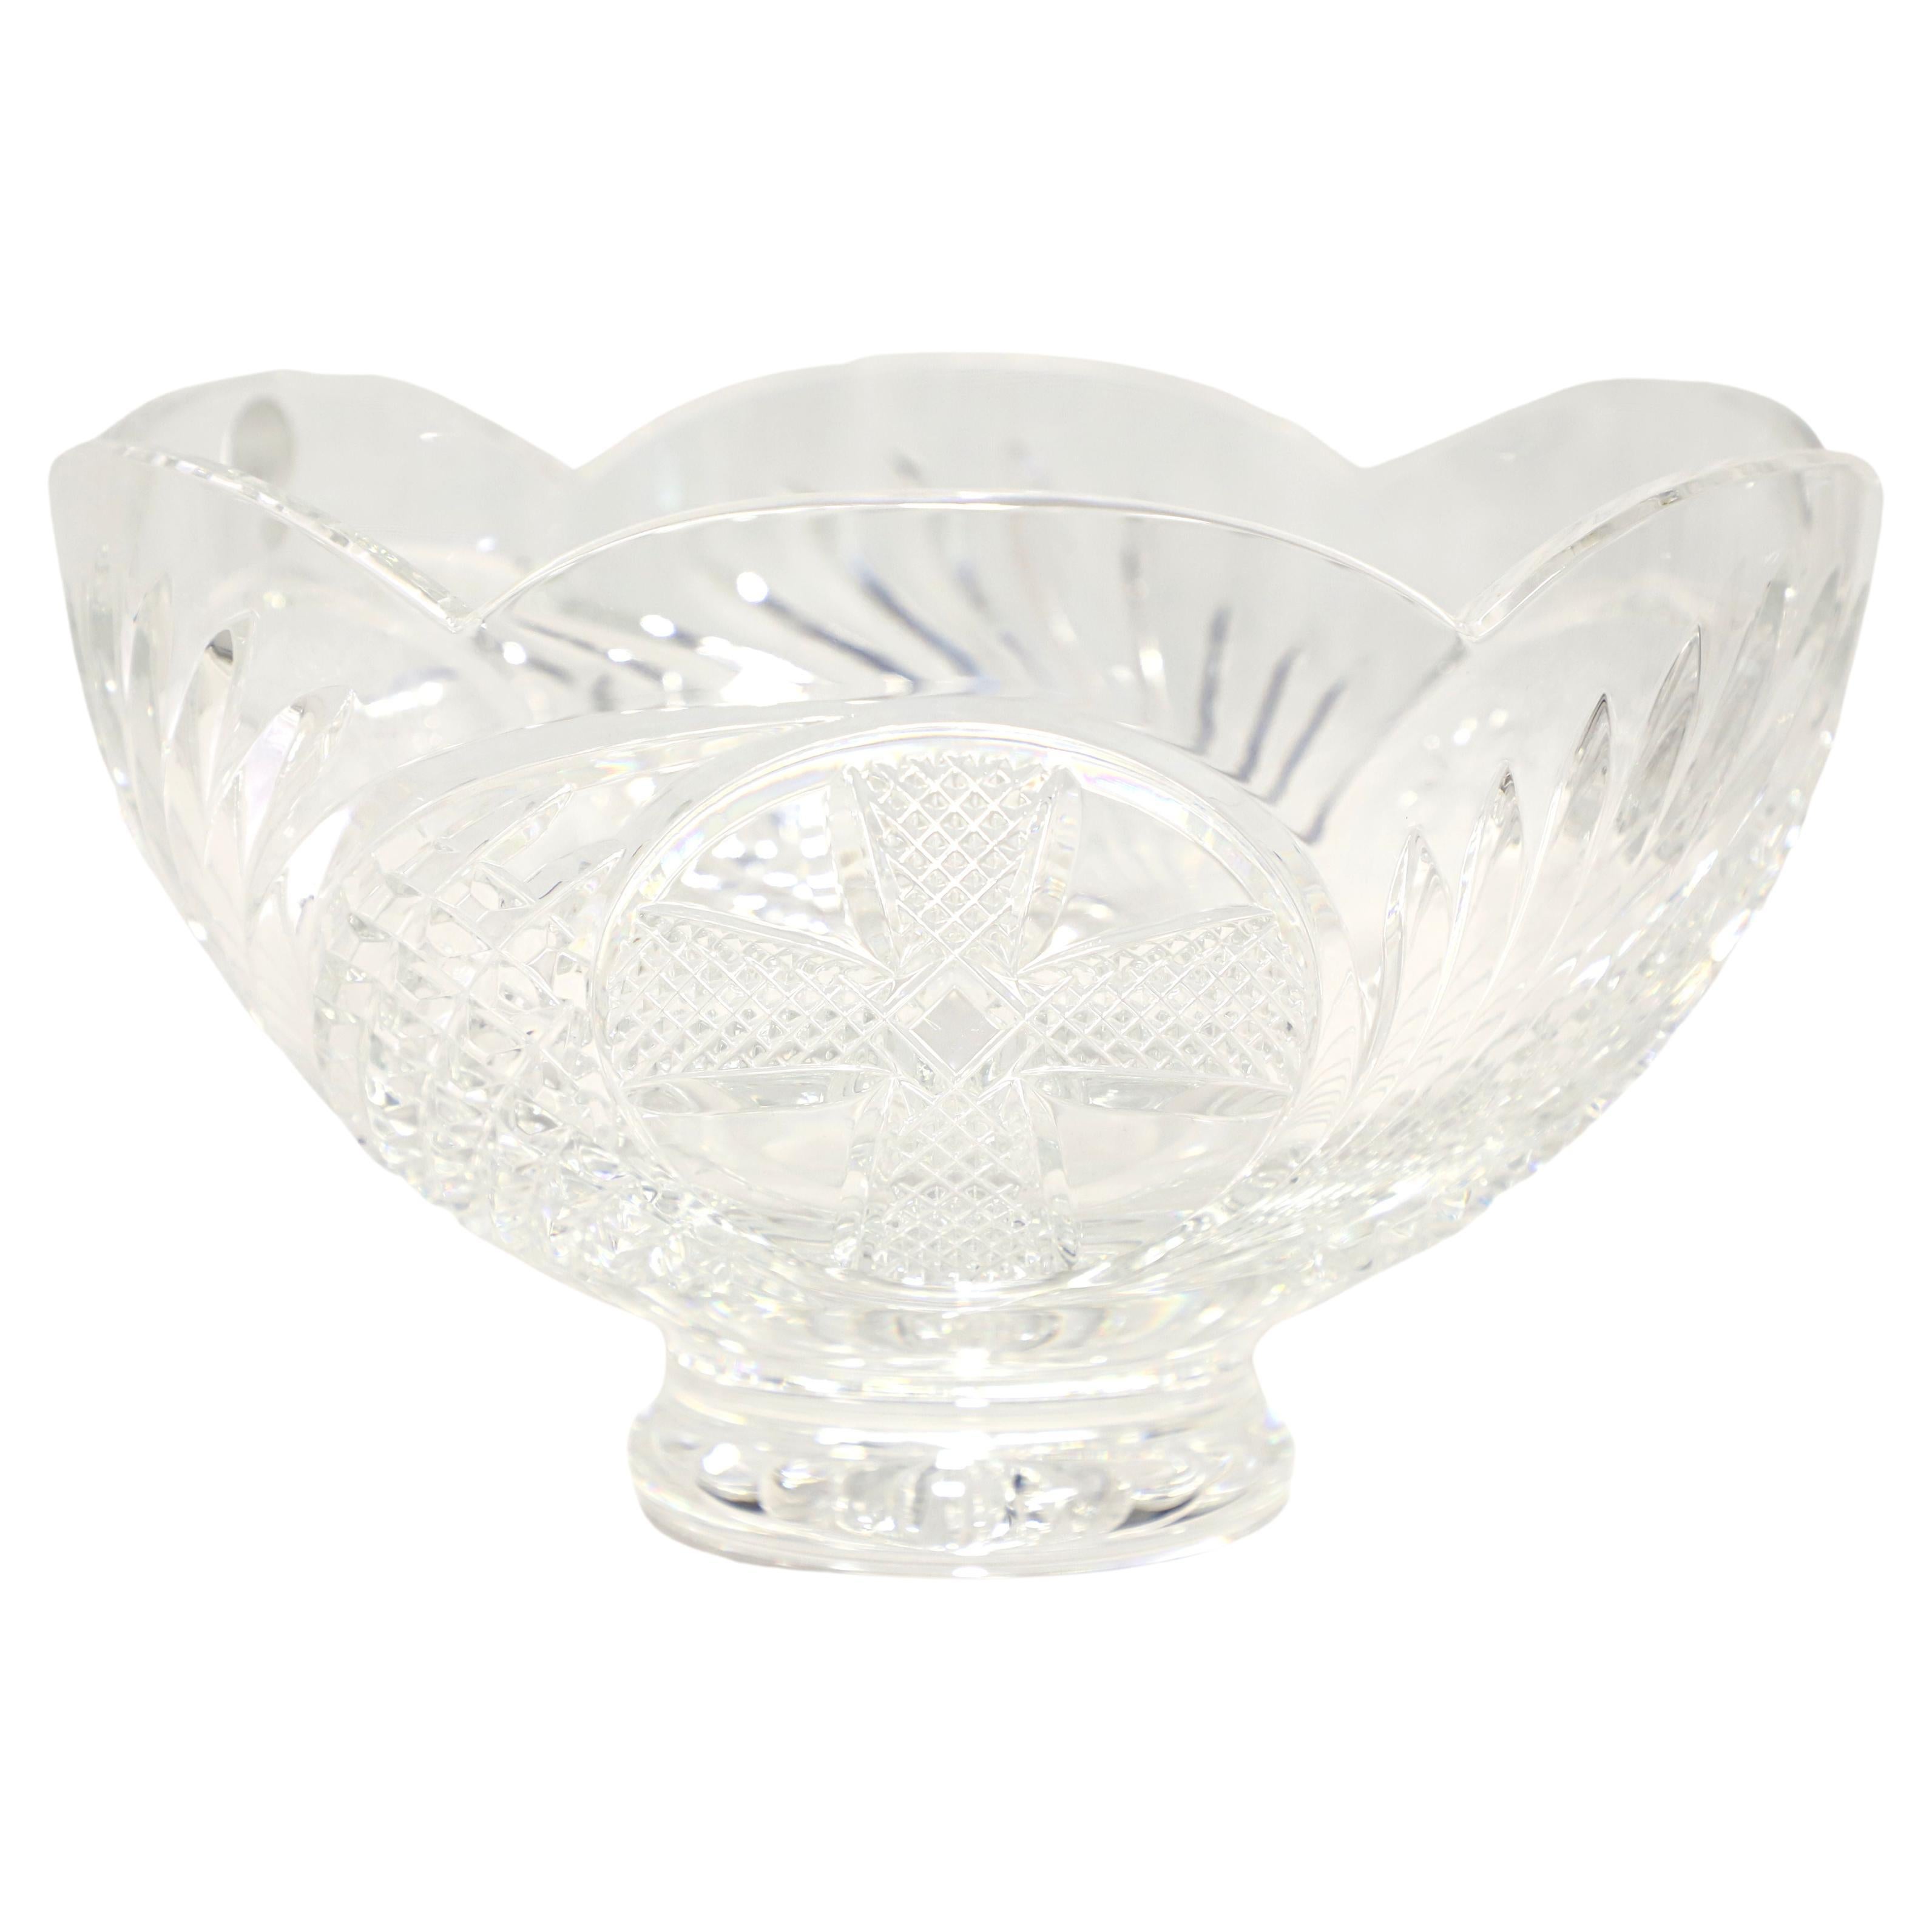 WATERFORD Crystal Ireland 10" Heritage of Ireland Scalloped Footed Bowl For Sale